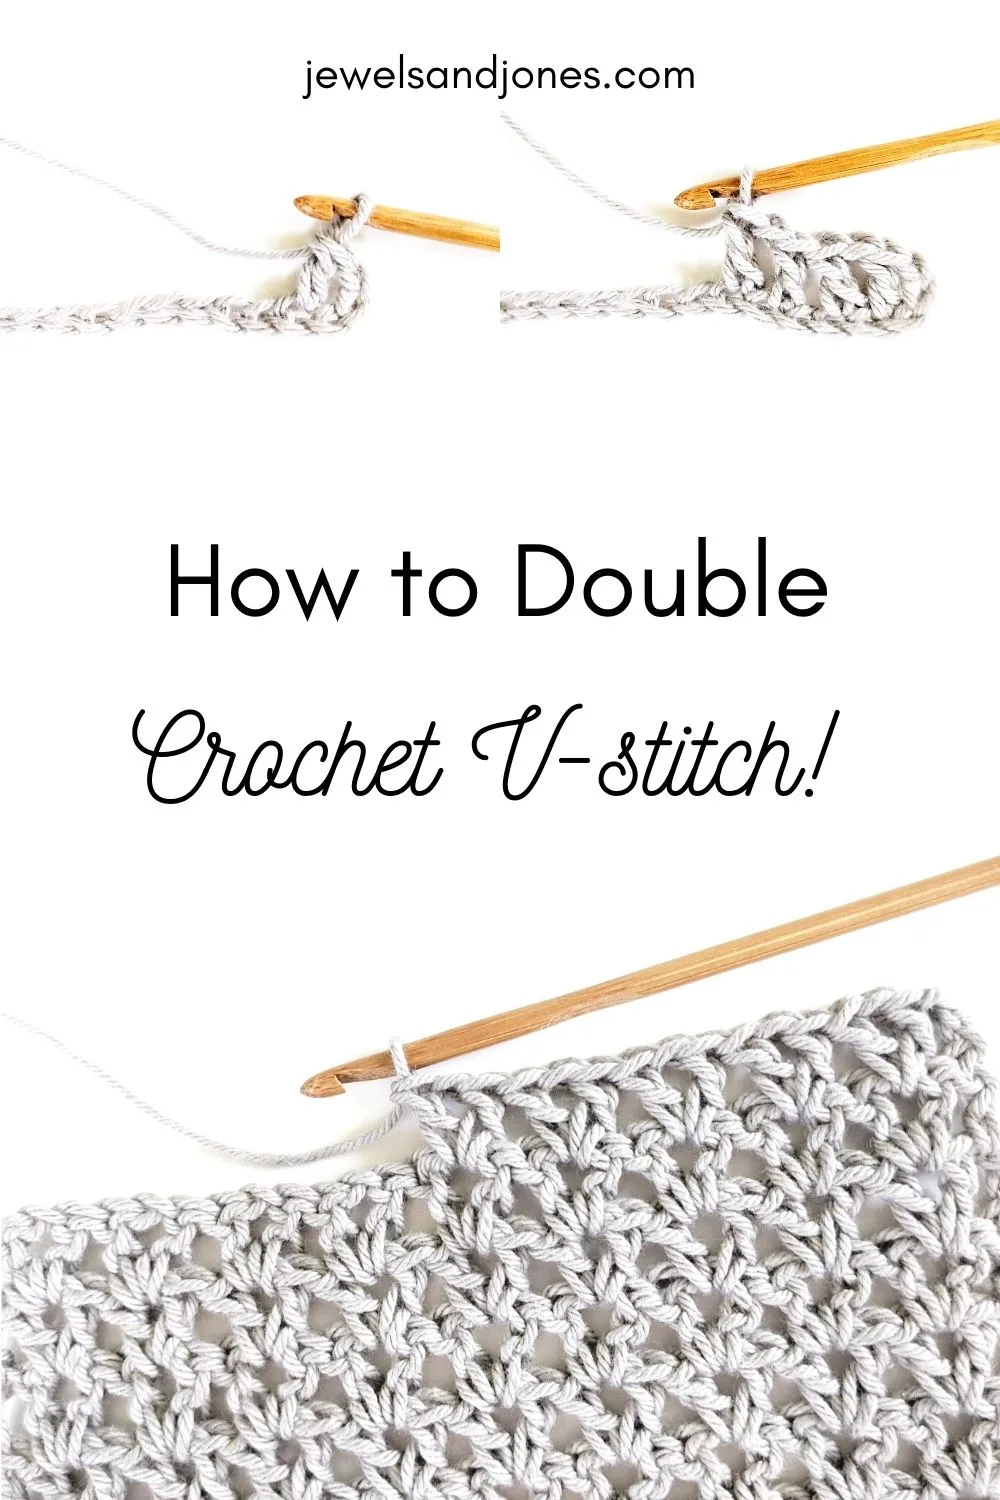 pinnable image shows a swatch of a crochet double v-stitch